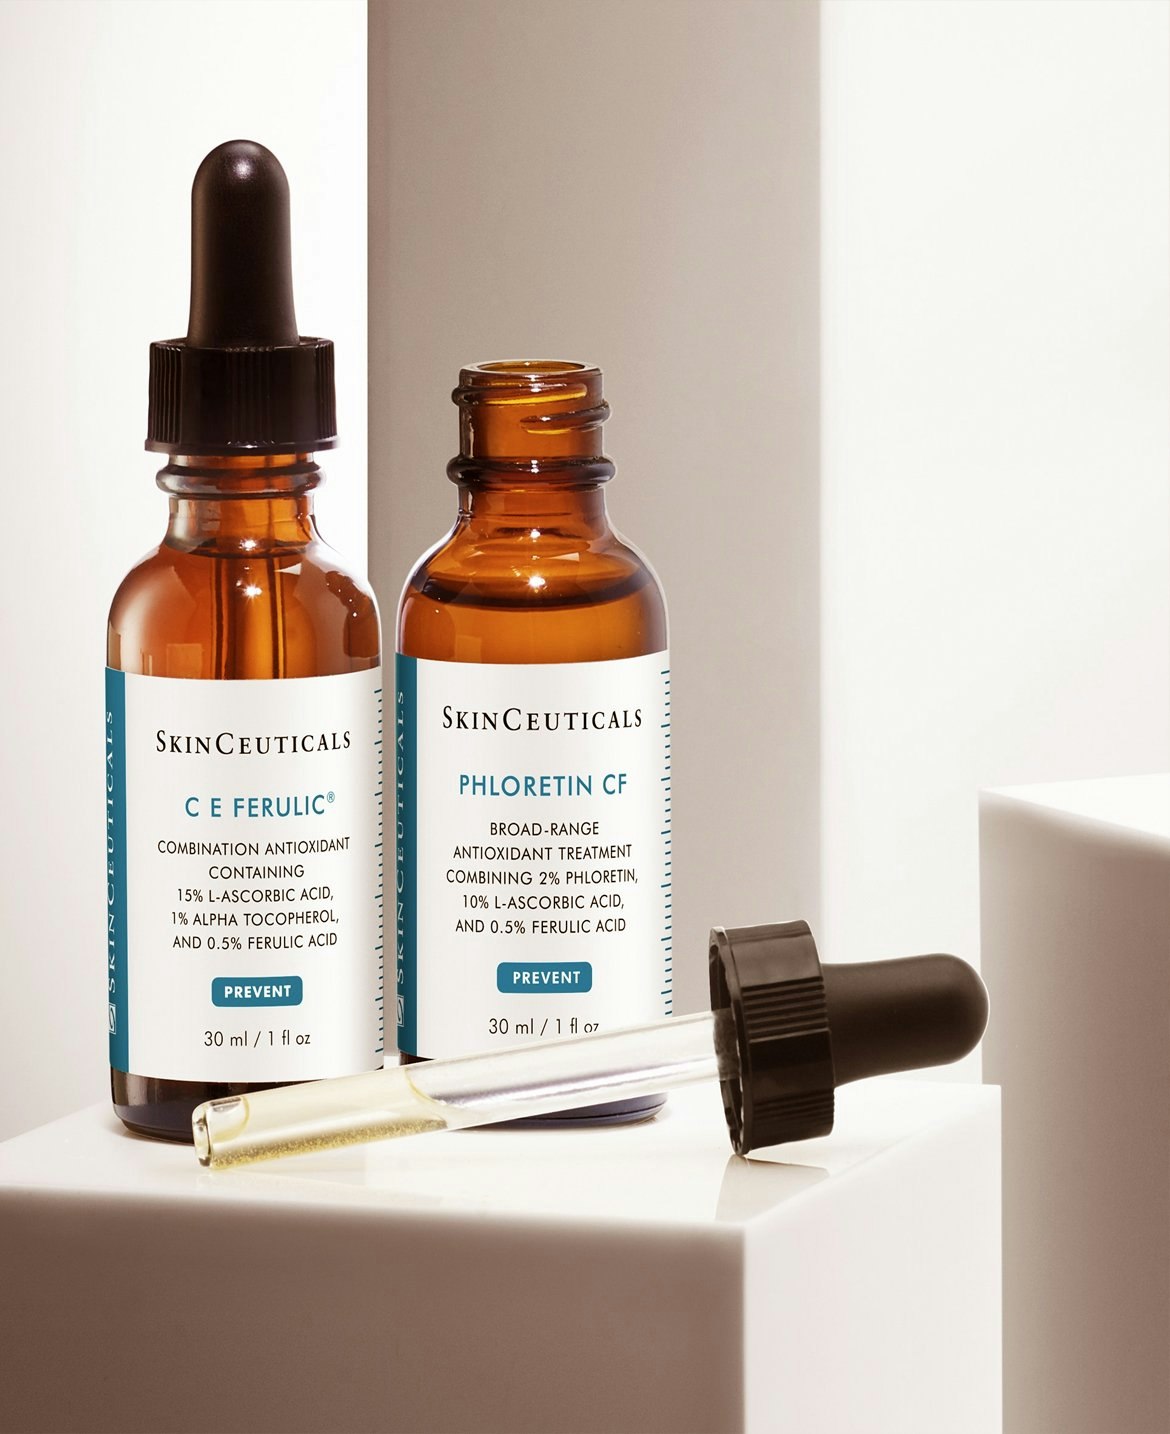 Skinceuticals - Created By Belle AB